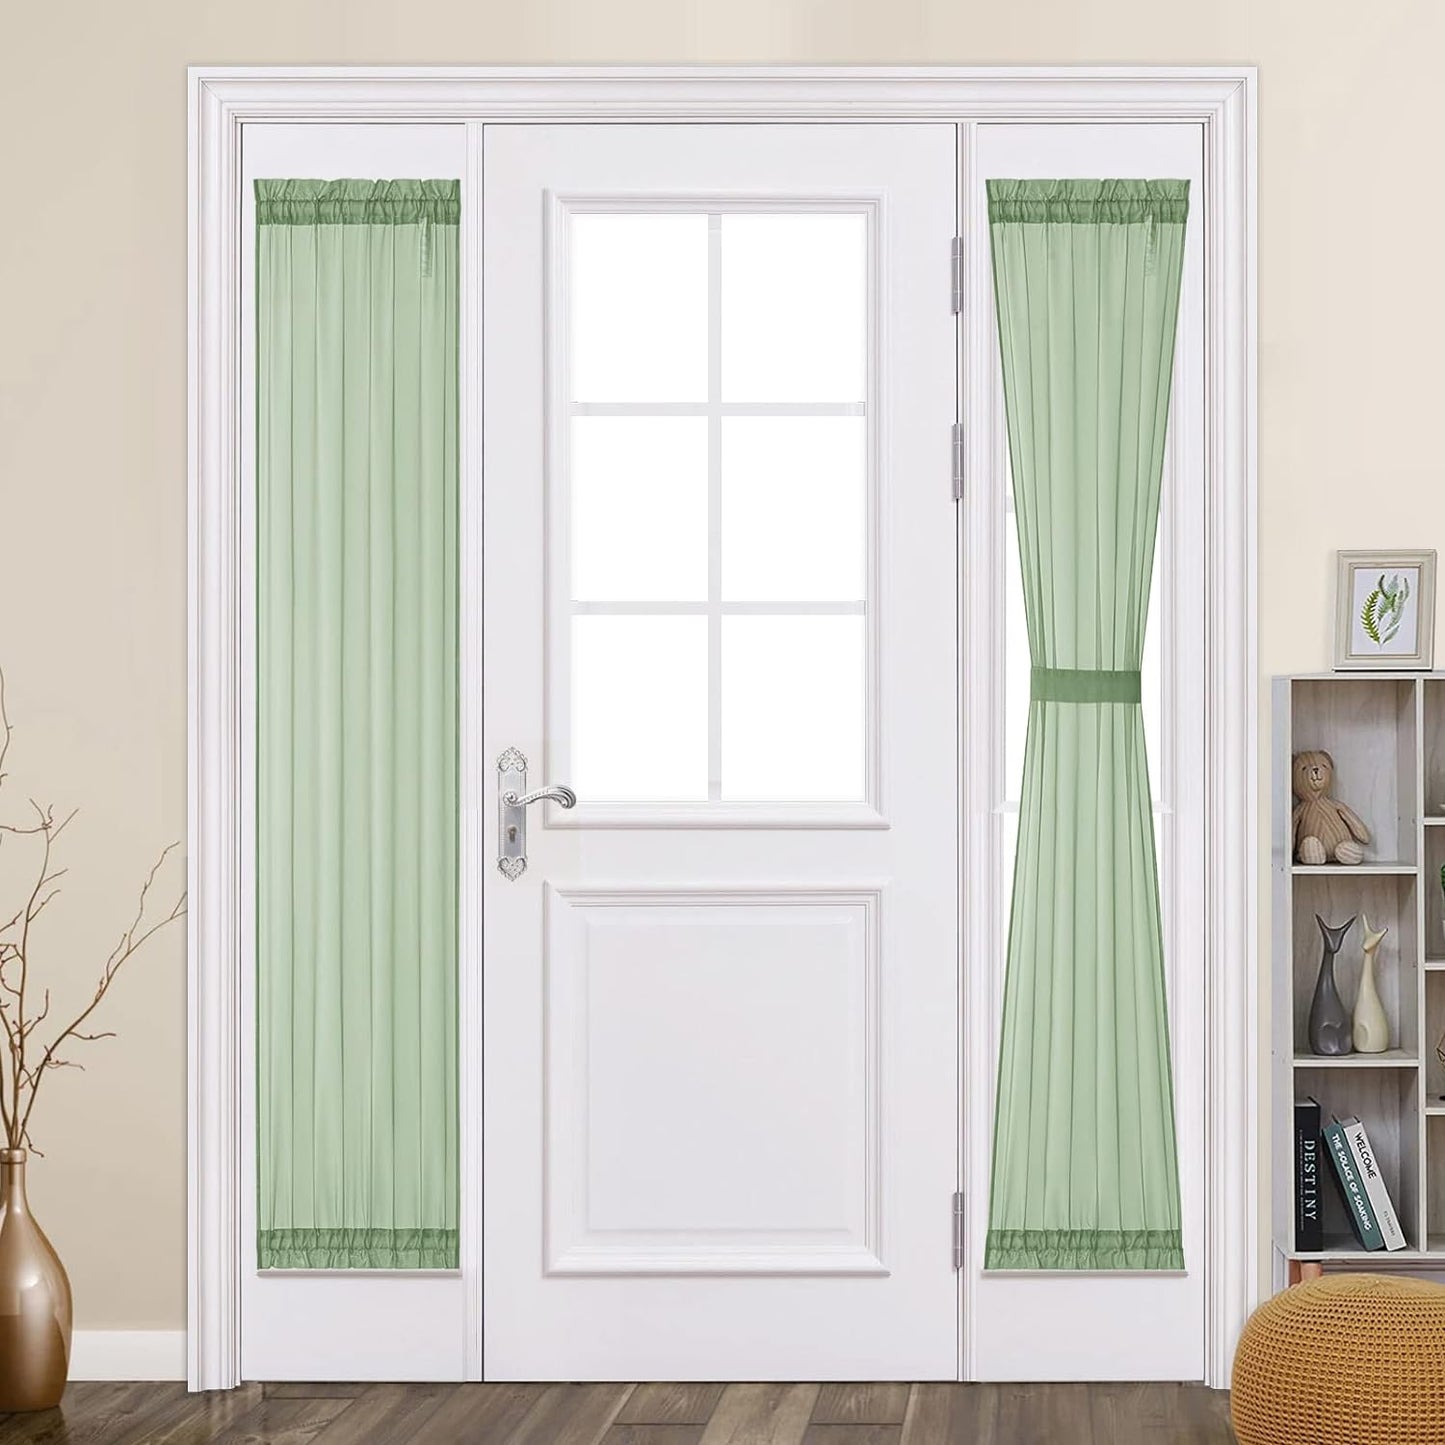 MIULEE French Door Sheer Curtains for Front Back Patio Glass Door Light Filtering Window Treatment with 2 Tiebacks 54 Wide and 72 Inches Length, White, Set of 2  MIULEE Sage Green 25"W X 72"L 